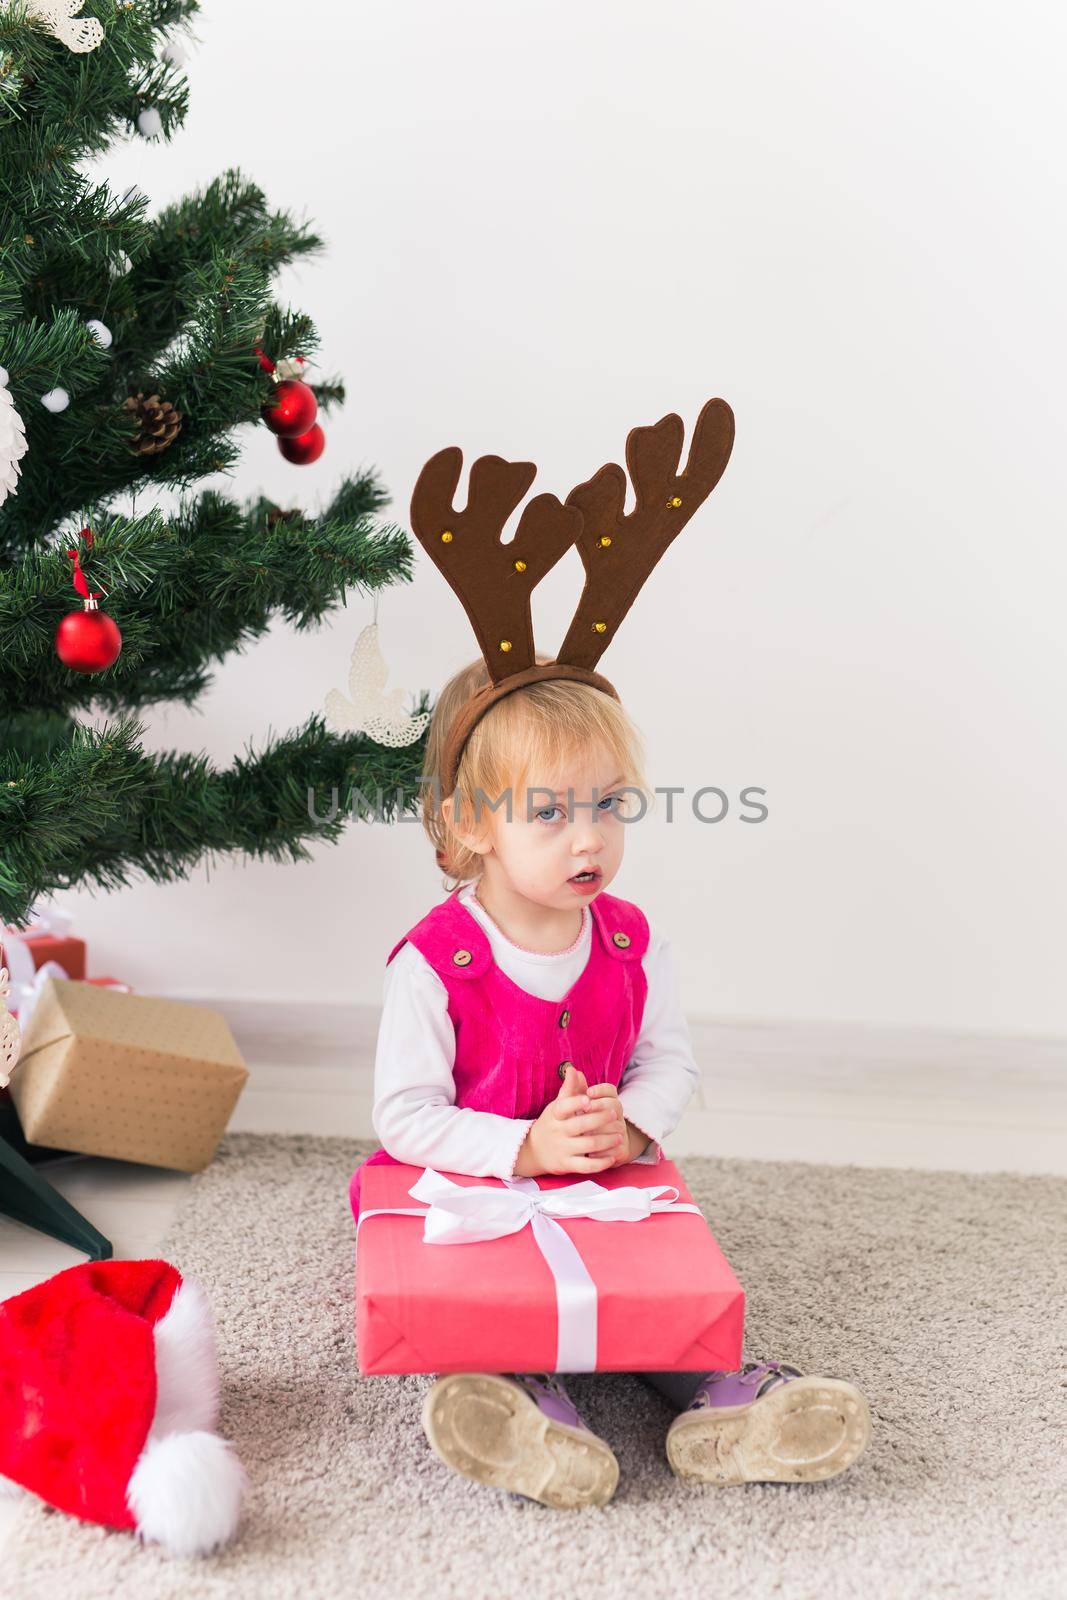 Baby holding Christmas gift. Winter holidays concept. by Satura86